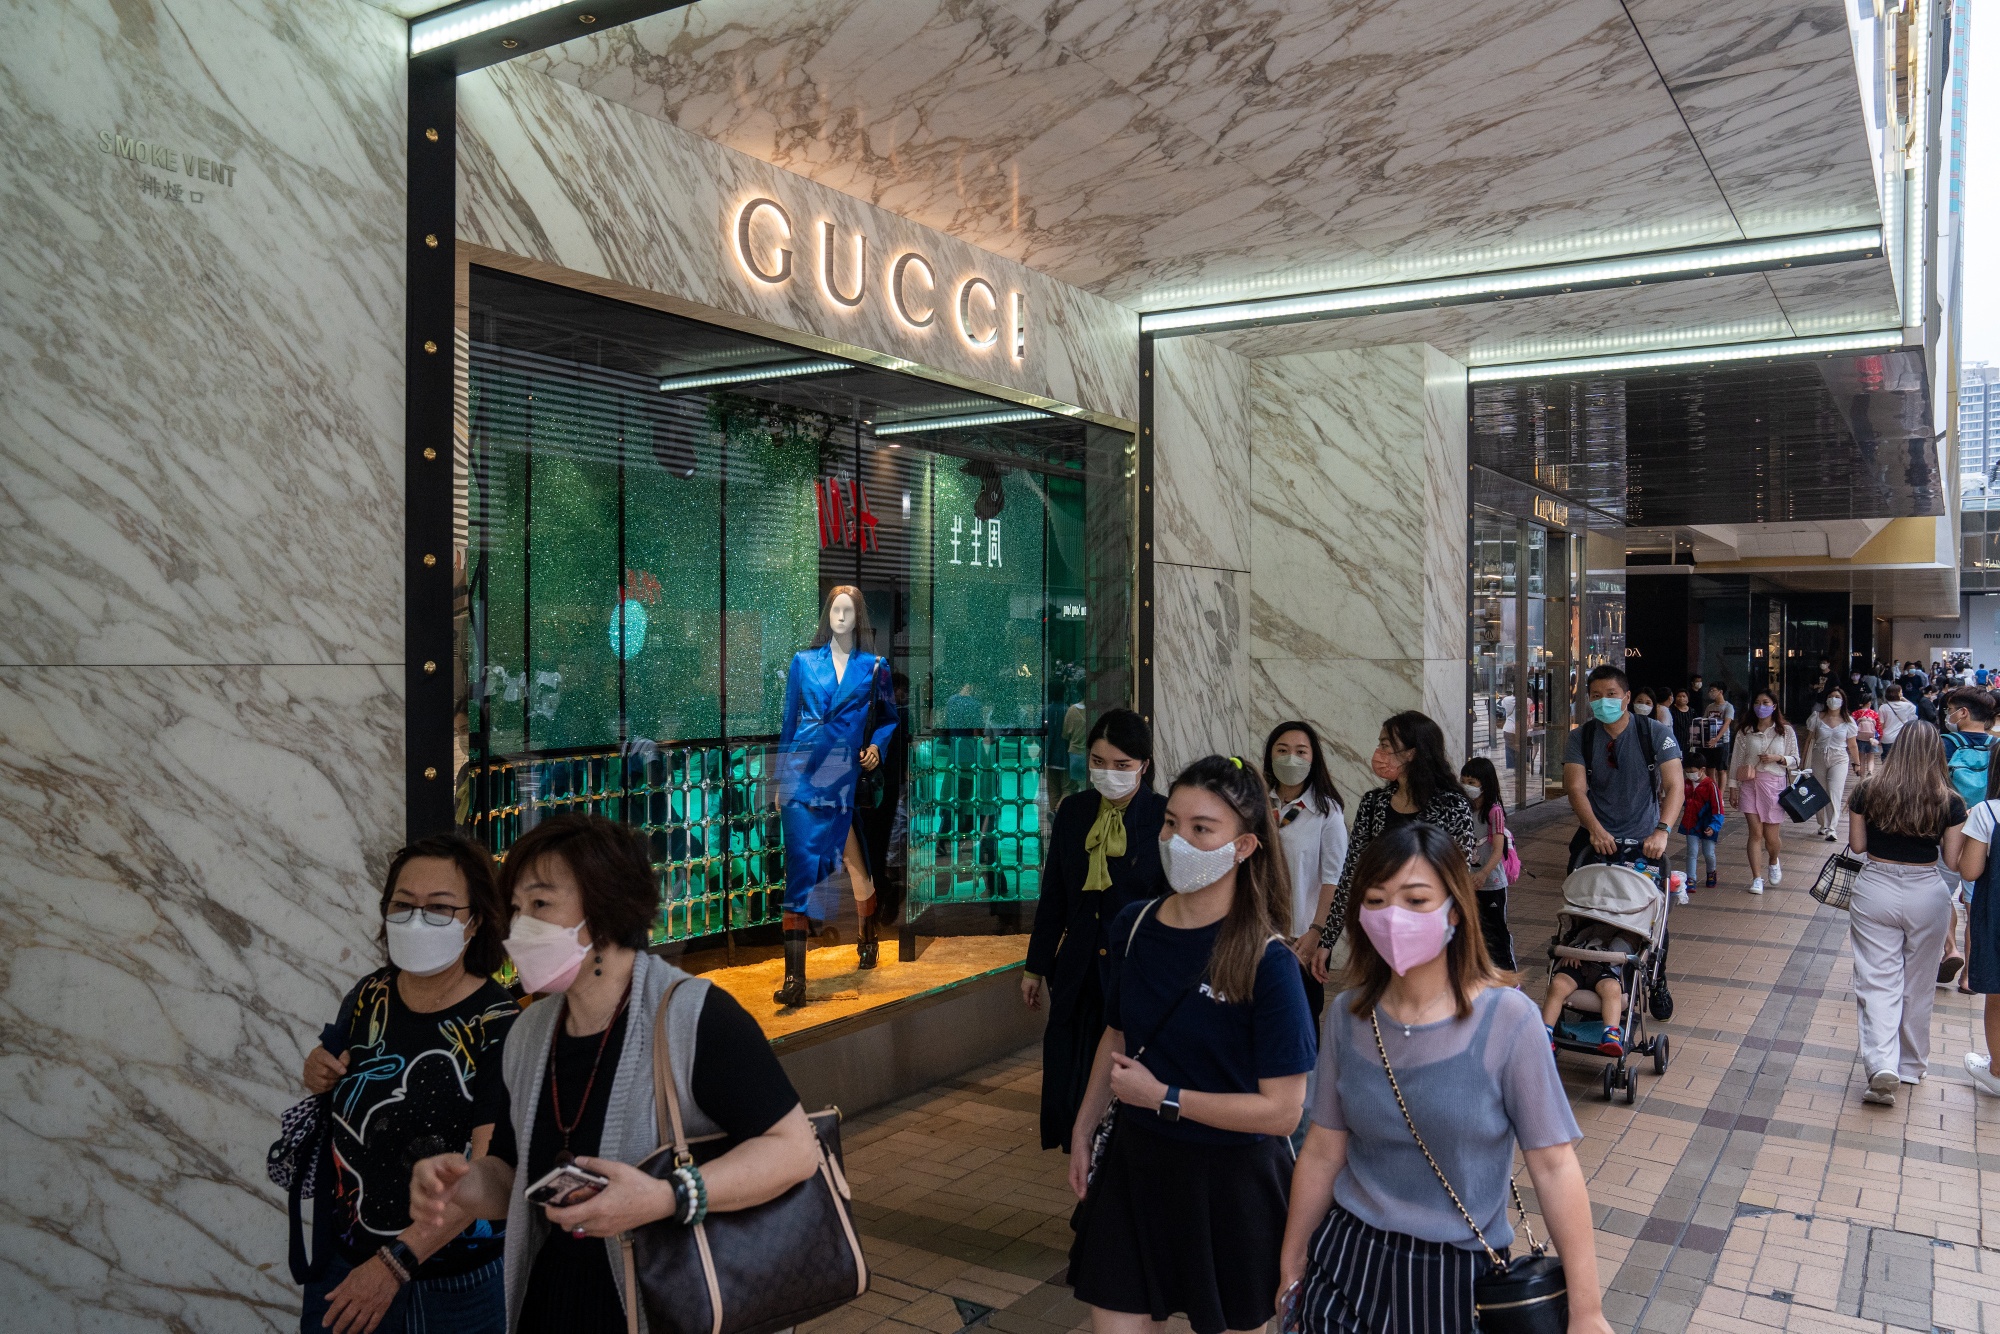 Gucci, Louis Vuitton Thrive Despite the Squeeze of Inflation